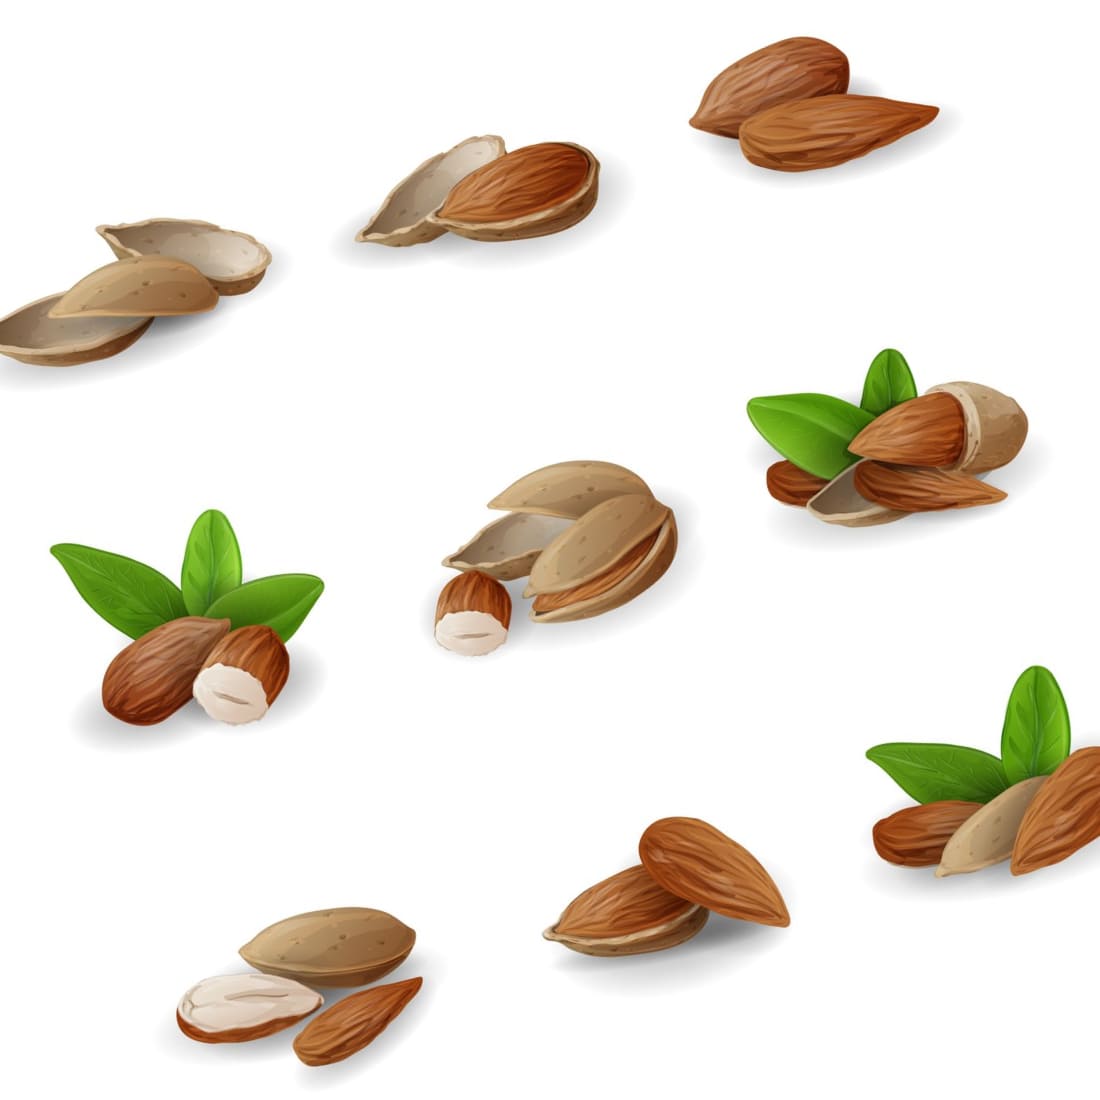 Almonds with green leaves.